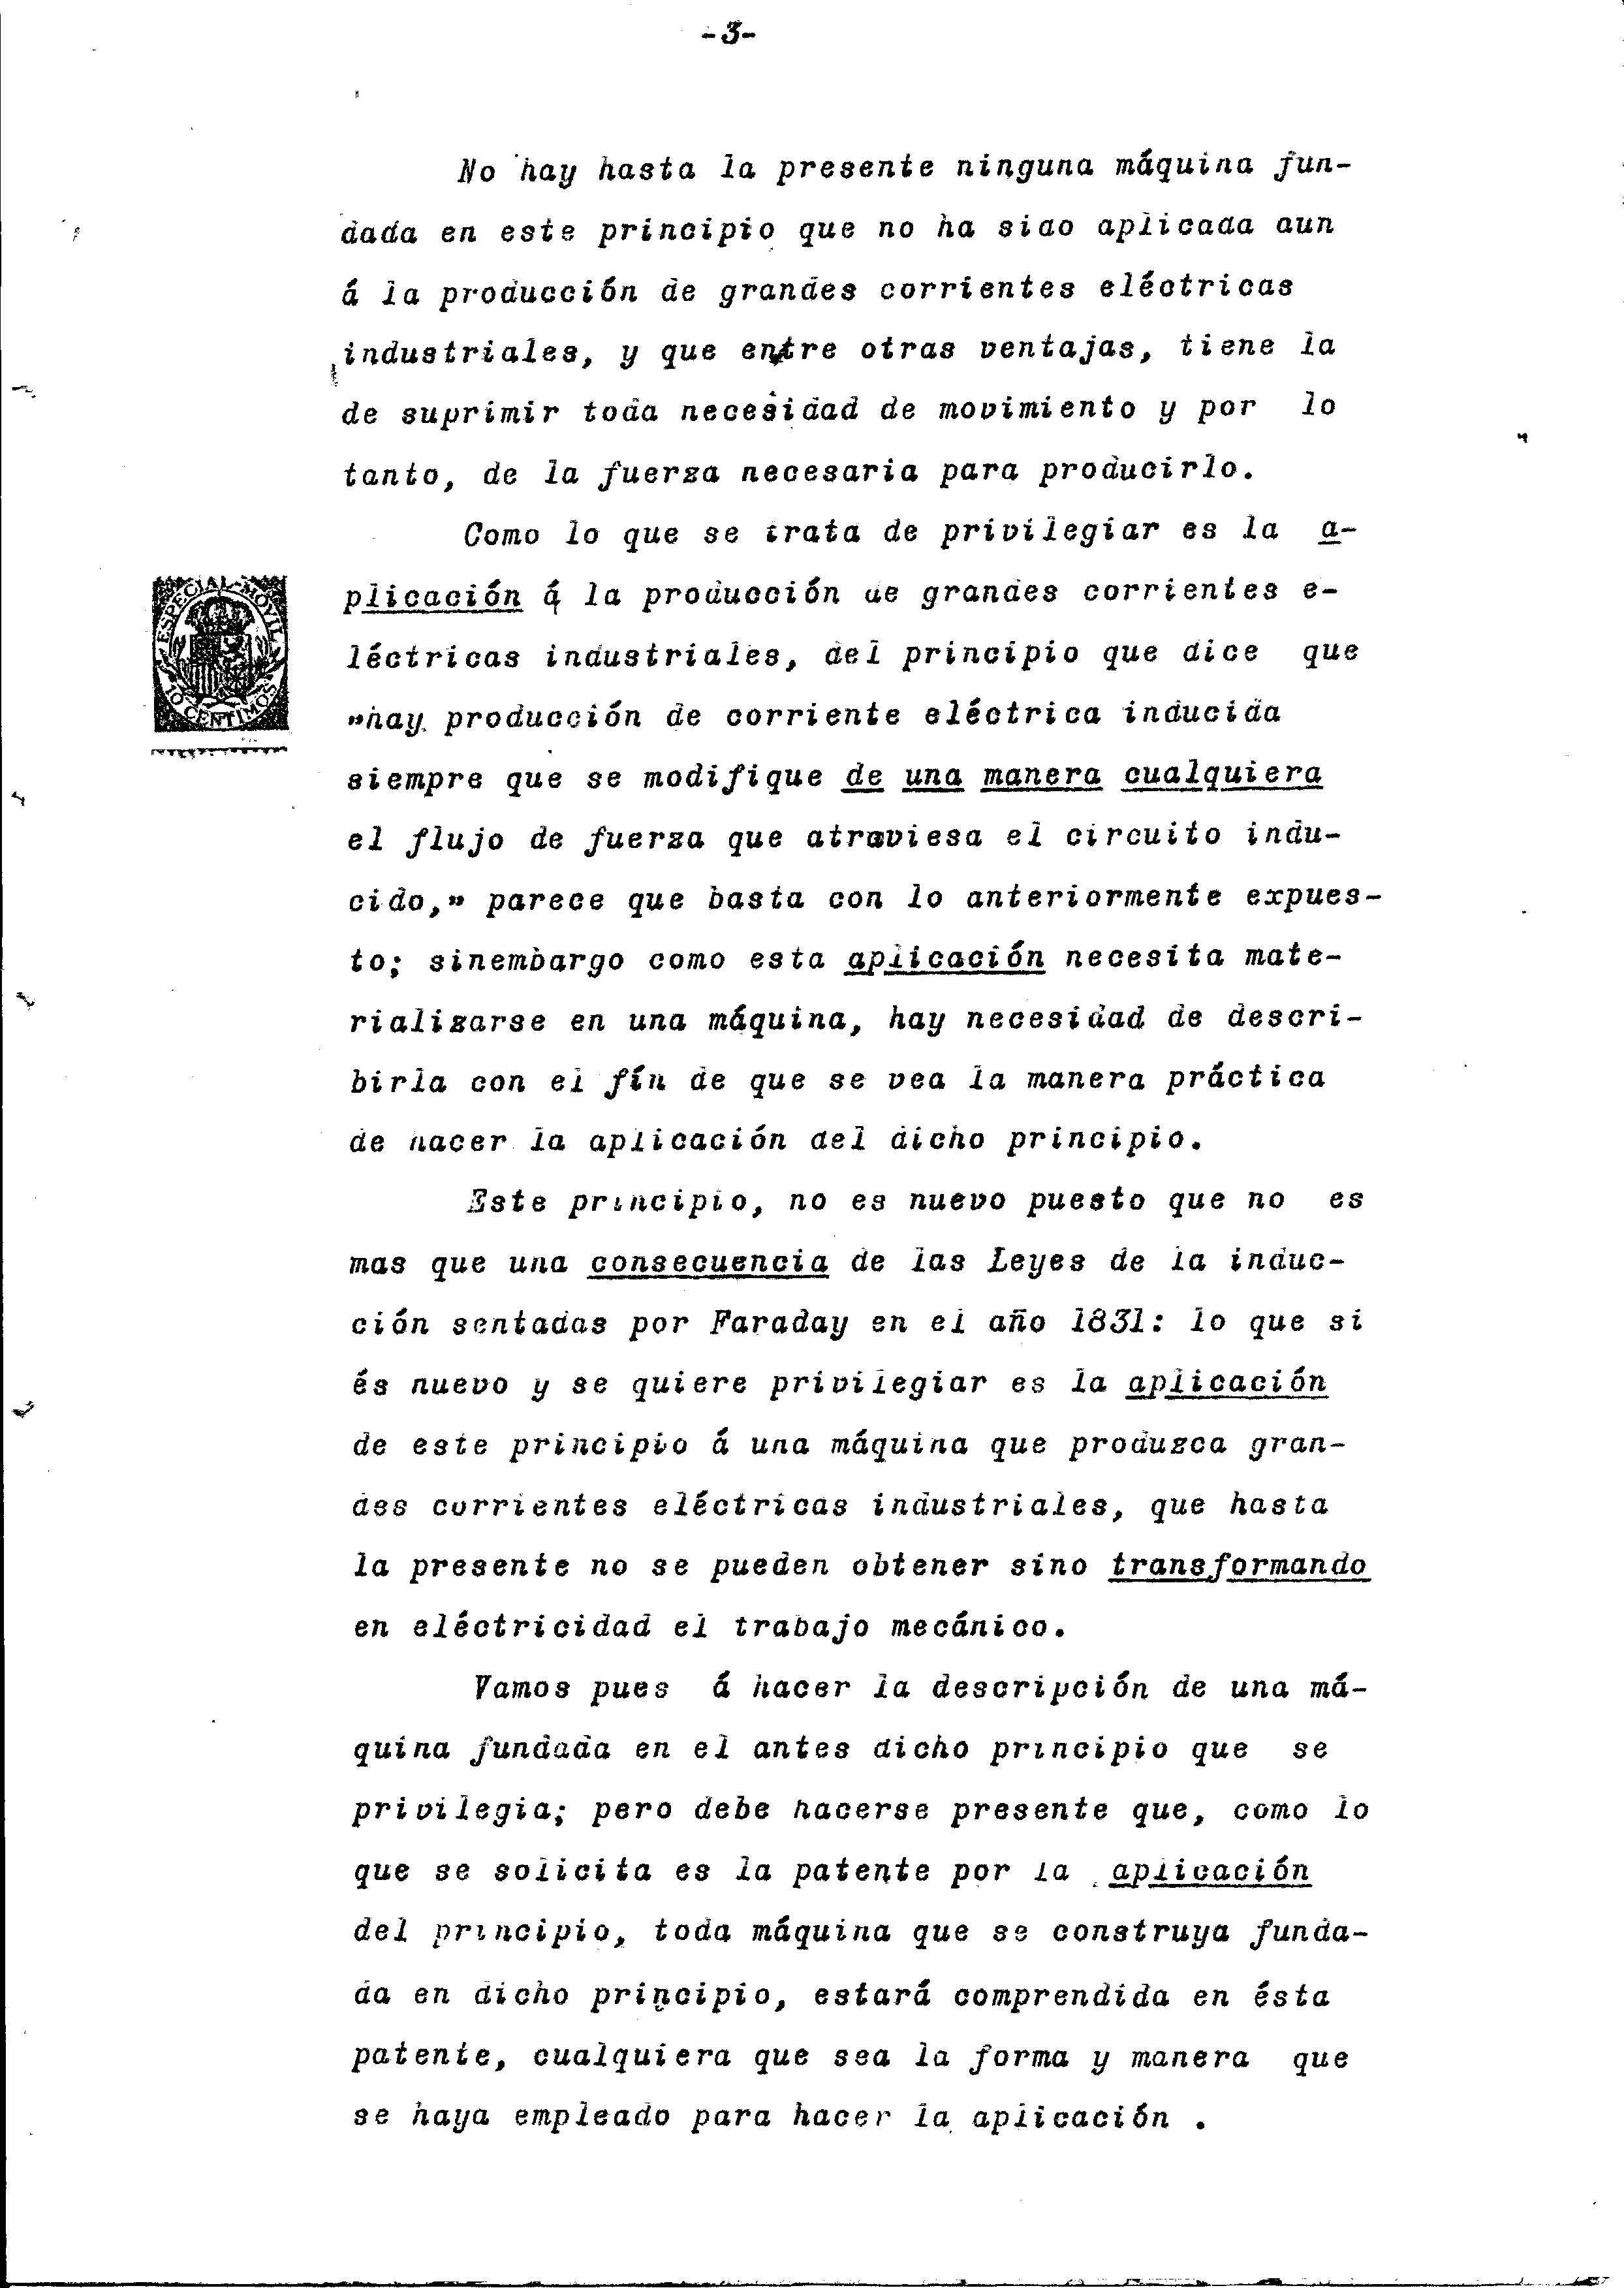 Clemente Figuera Patente 1908_Num_44267_scanned_OCR_Page_04.jpg